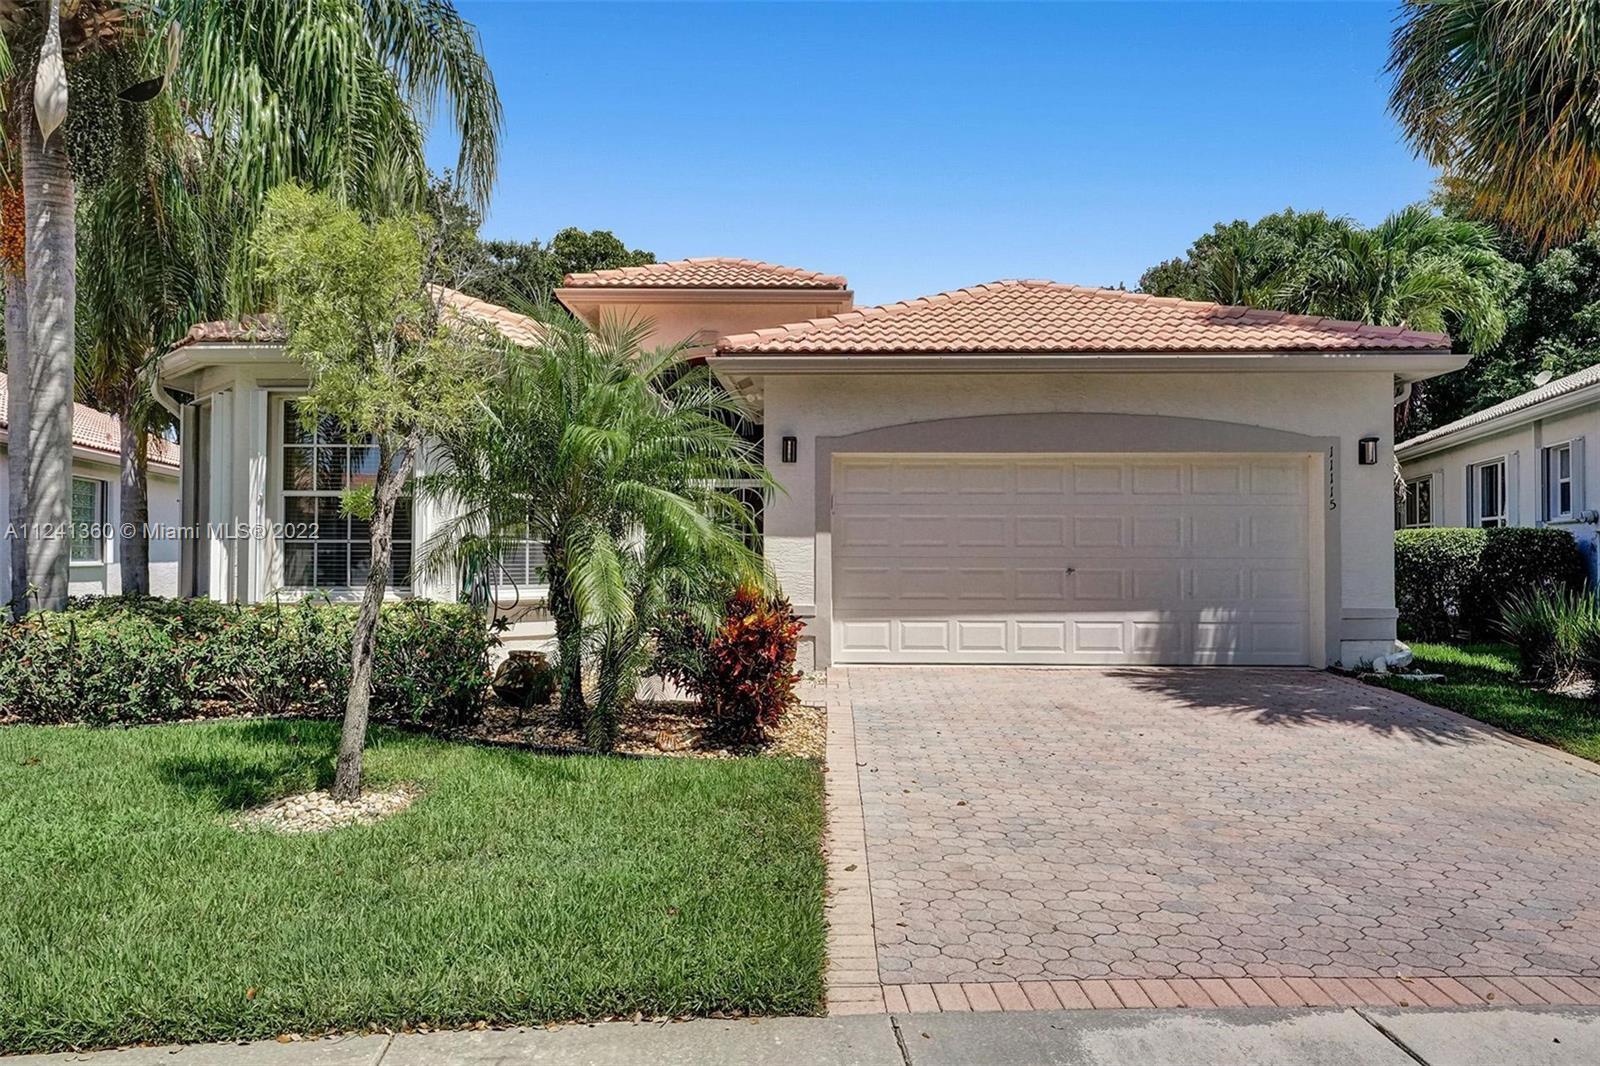 Your Wait is Over…. Immaculate, 3 Bed, 2.5 Bath, Persian Model Home in Sought After Valencia Isles. 